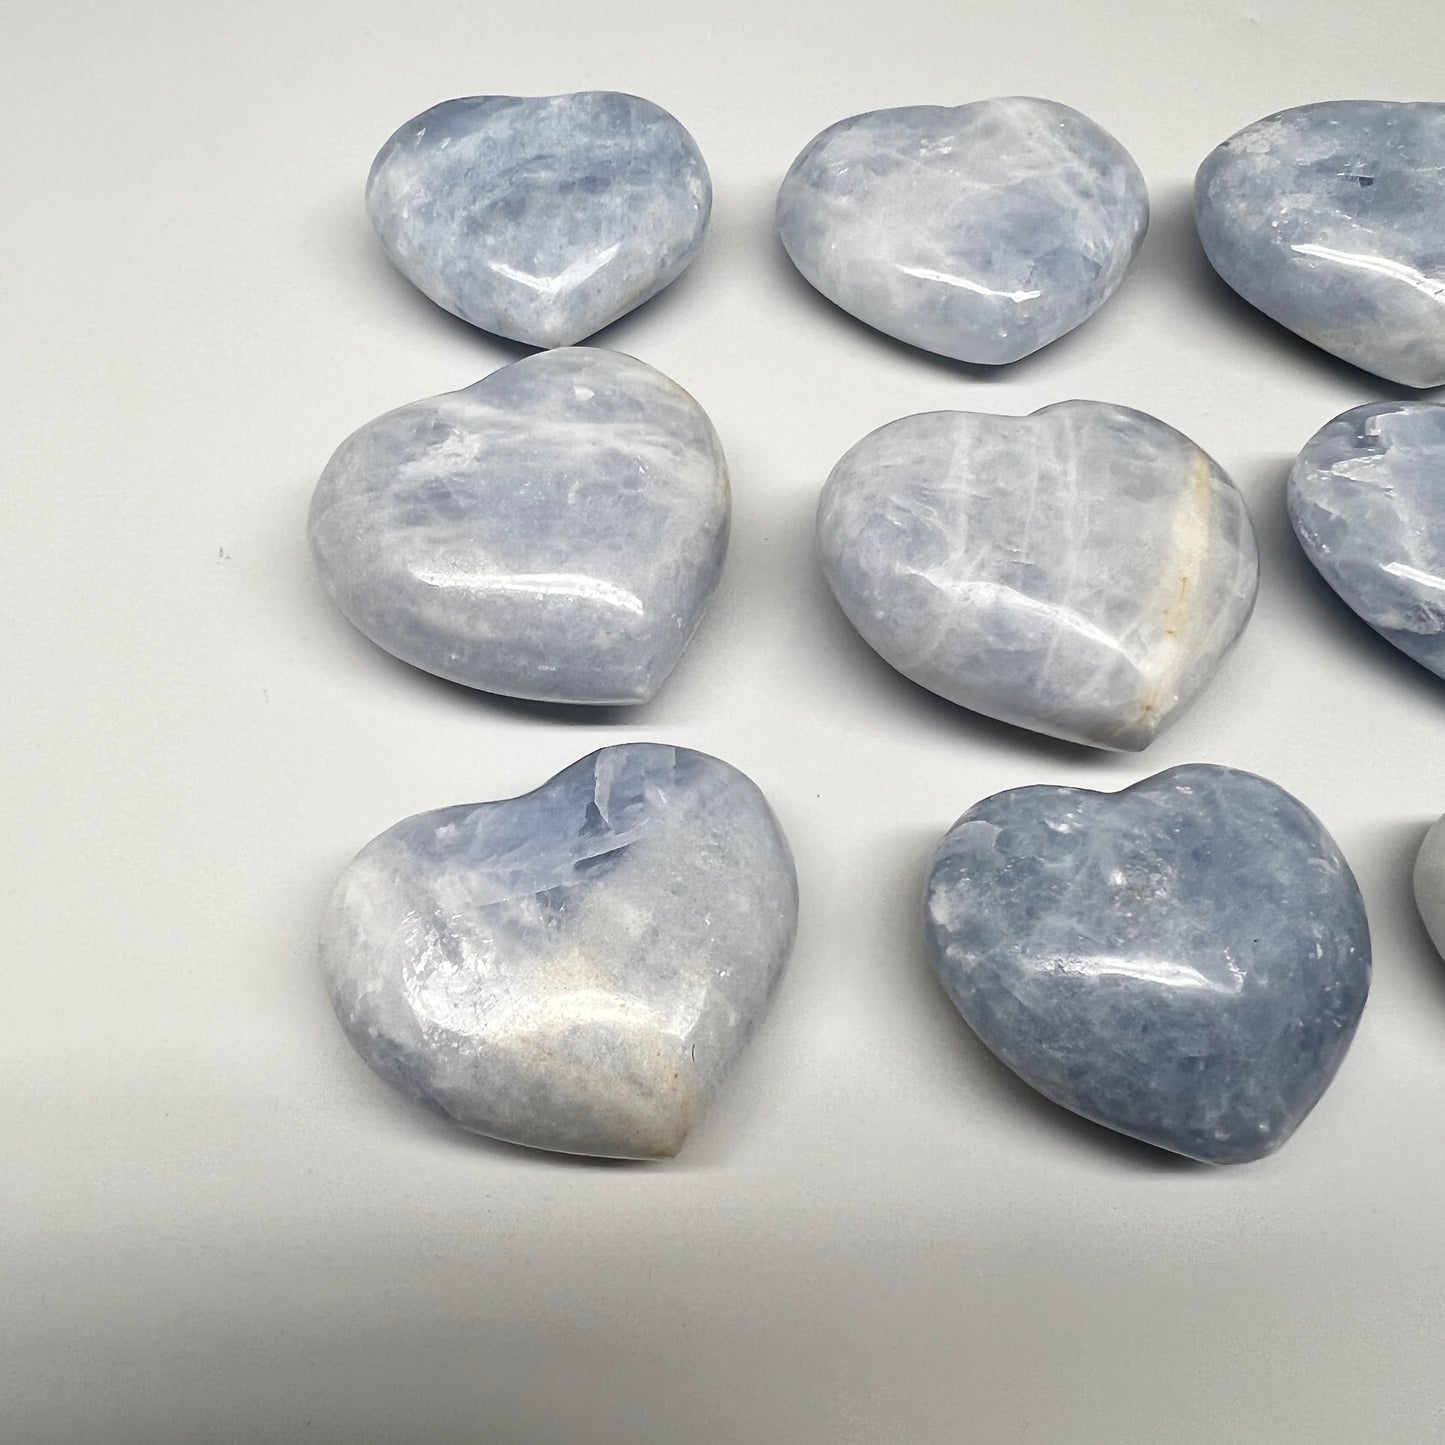 1040g (2.2 lbs) , 9 pcs, 1.7"- 2.3", Blue Calcite Hearts from Madagascar, B20854